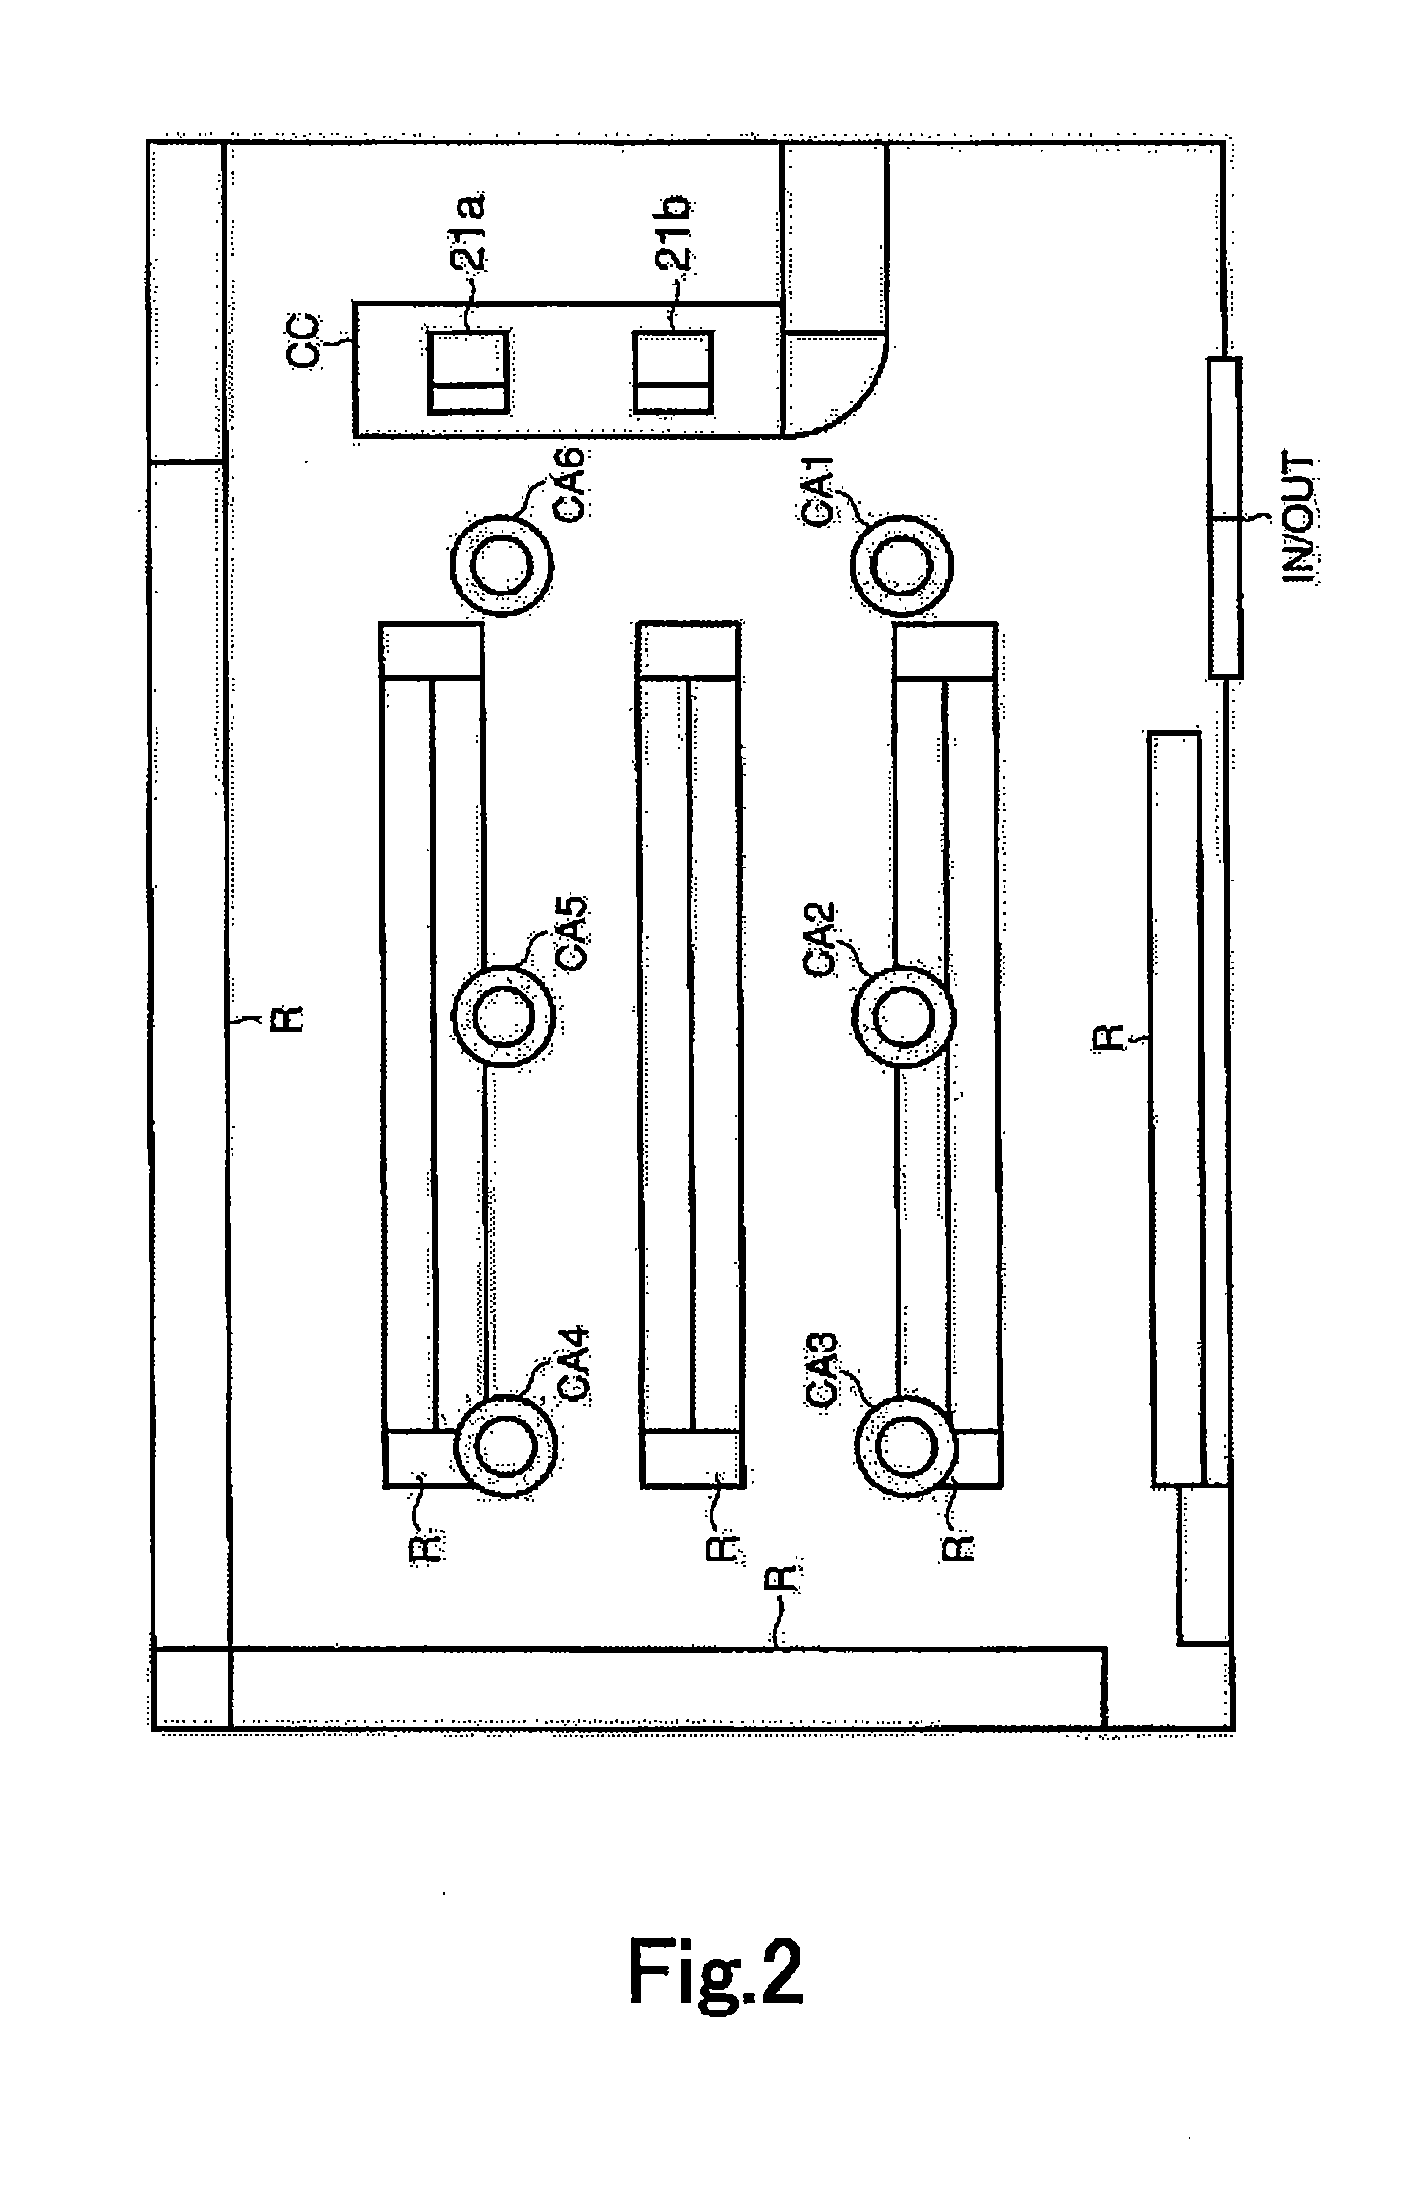 Apparatus and method for analyzing personal behavior